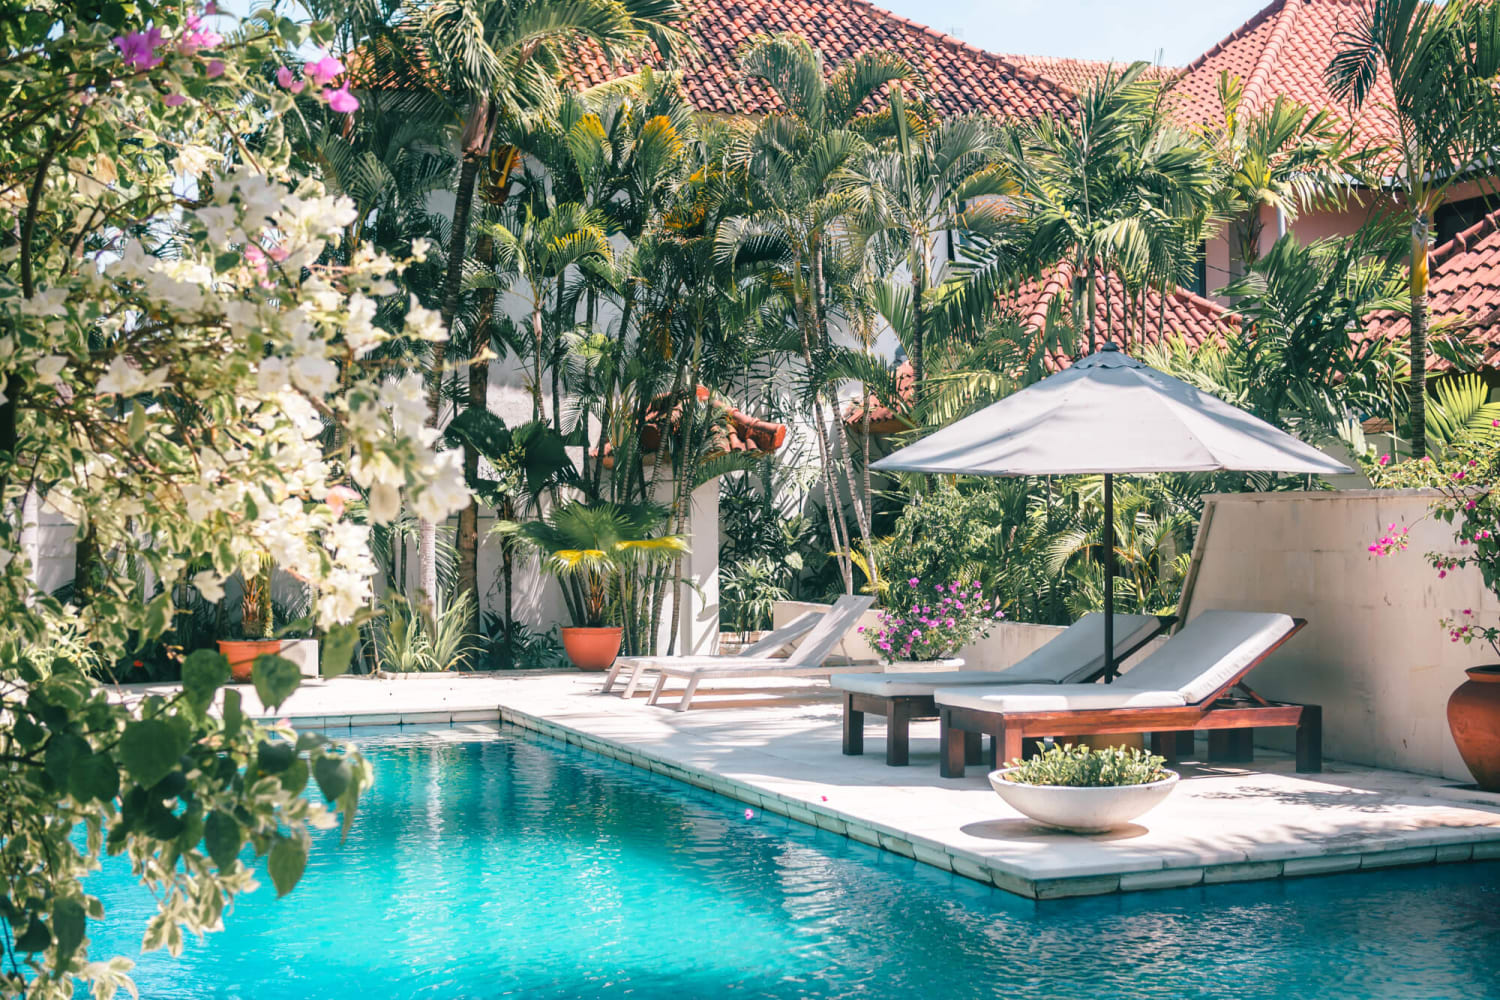 9 of Bali's absolute best budget hotels, villas & Airbnbs!